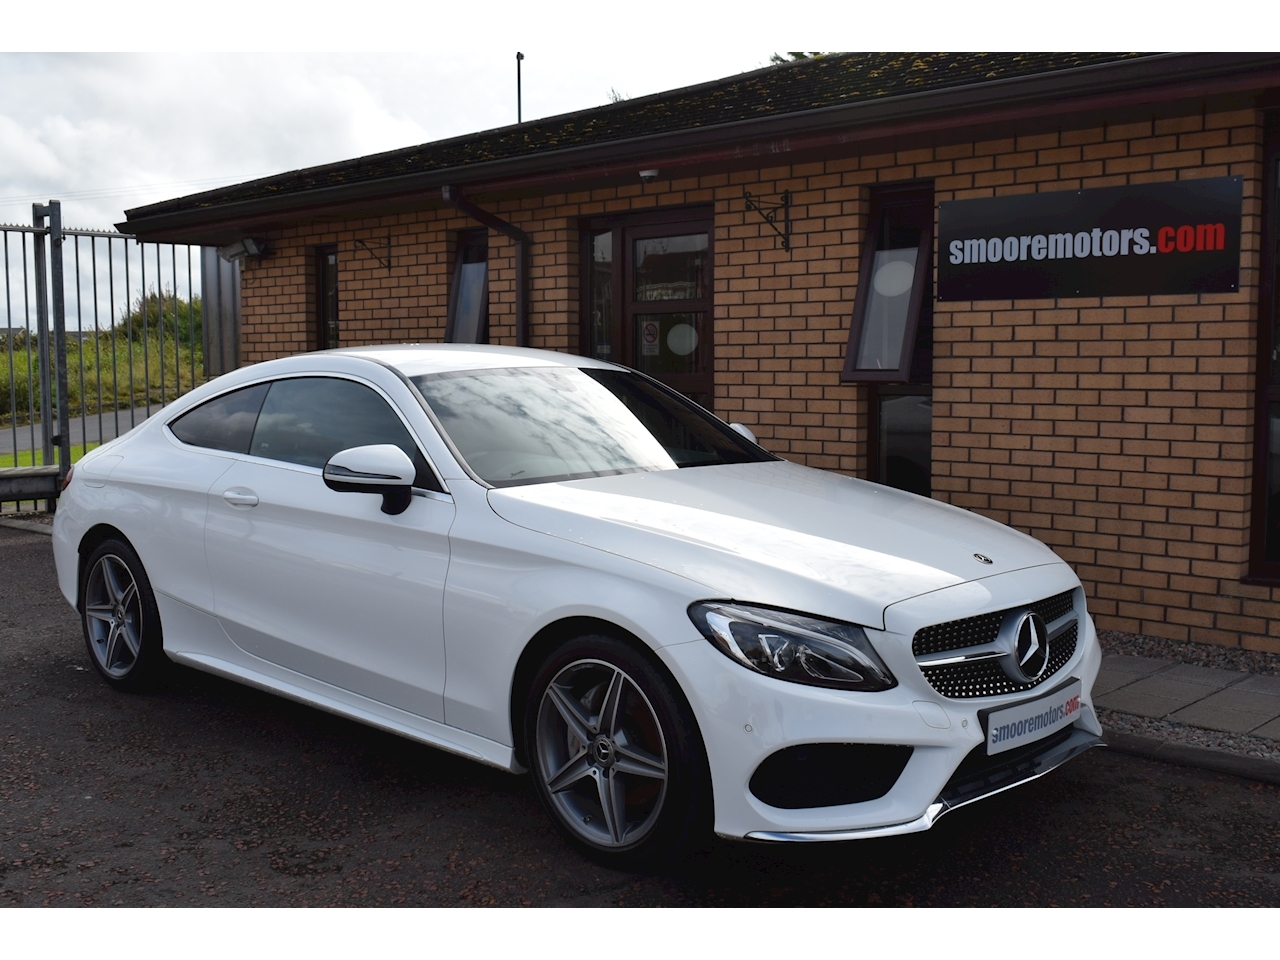 Used 17 Mercedes Benz C Class C 2 D Amg Line Coupe 2 1 Automatic Diesel For Sale In County Antrim S Moore Motors